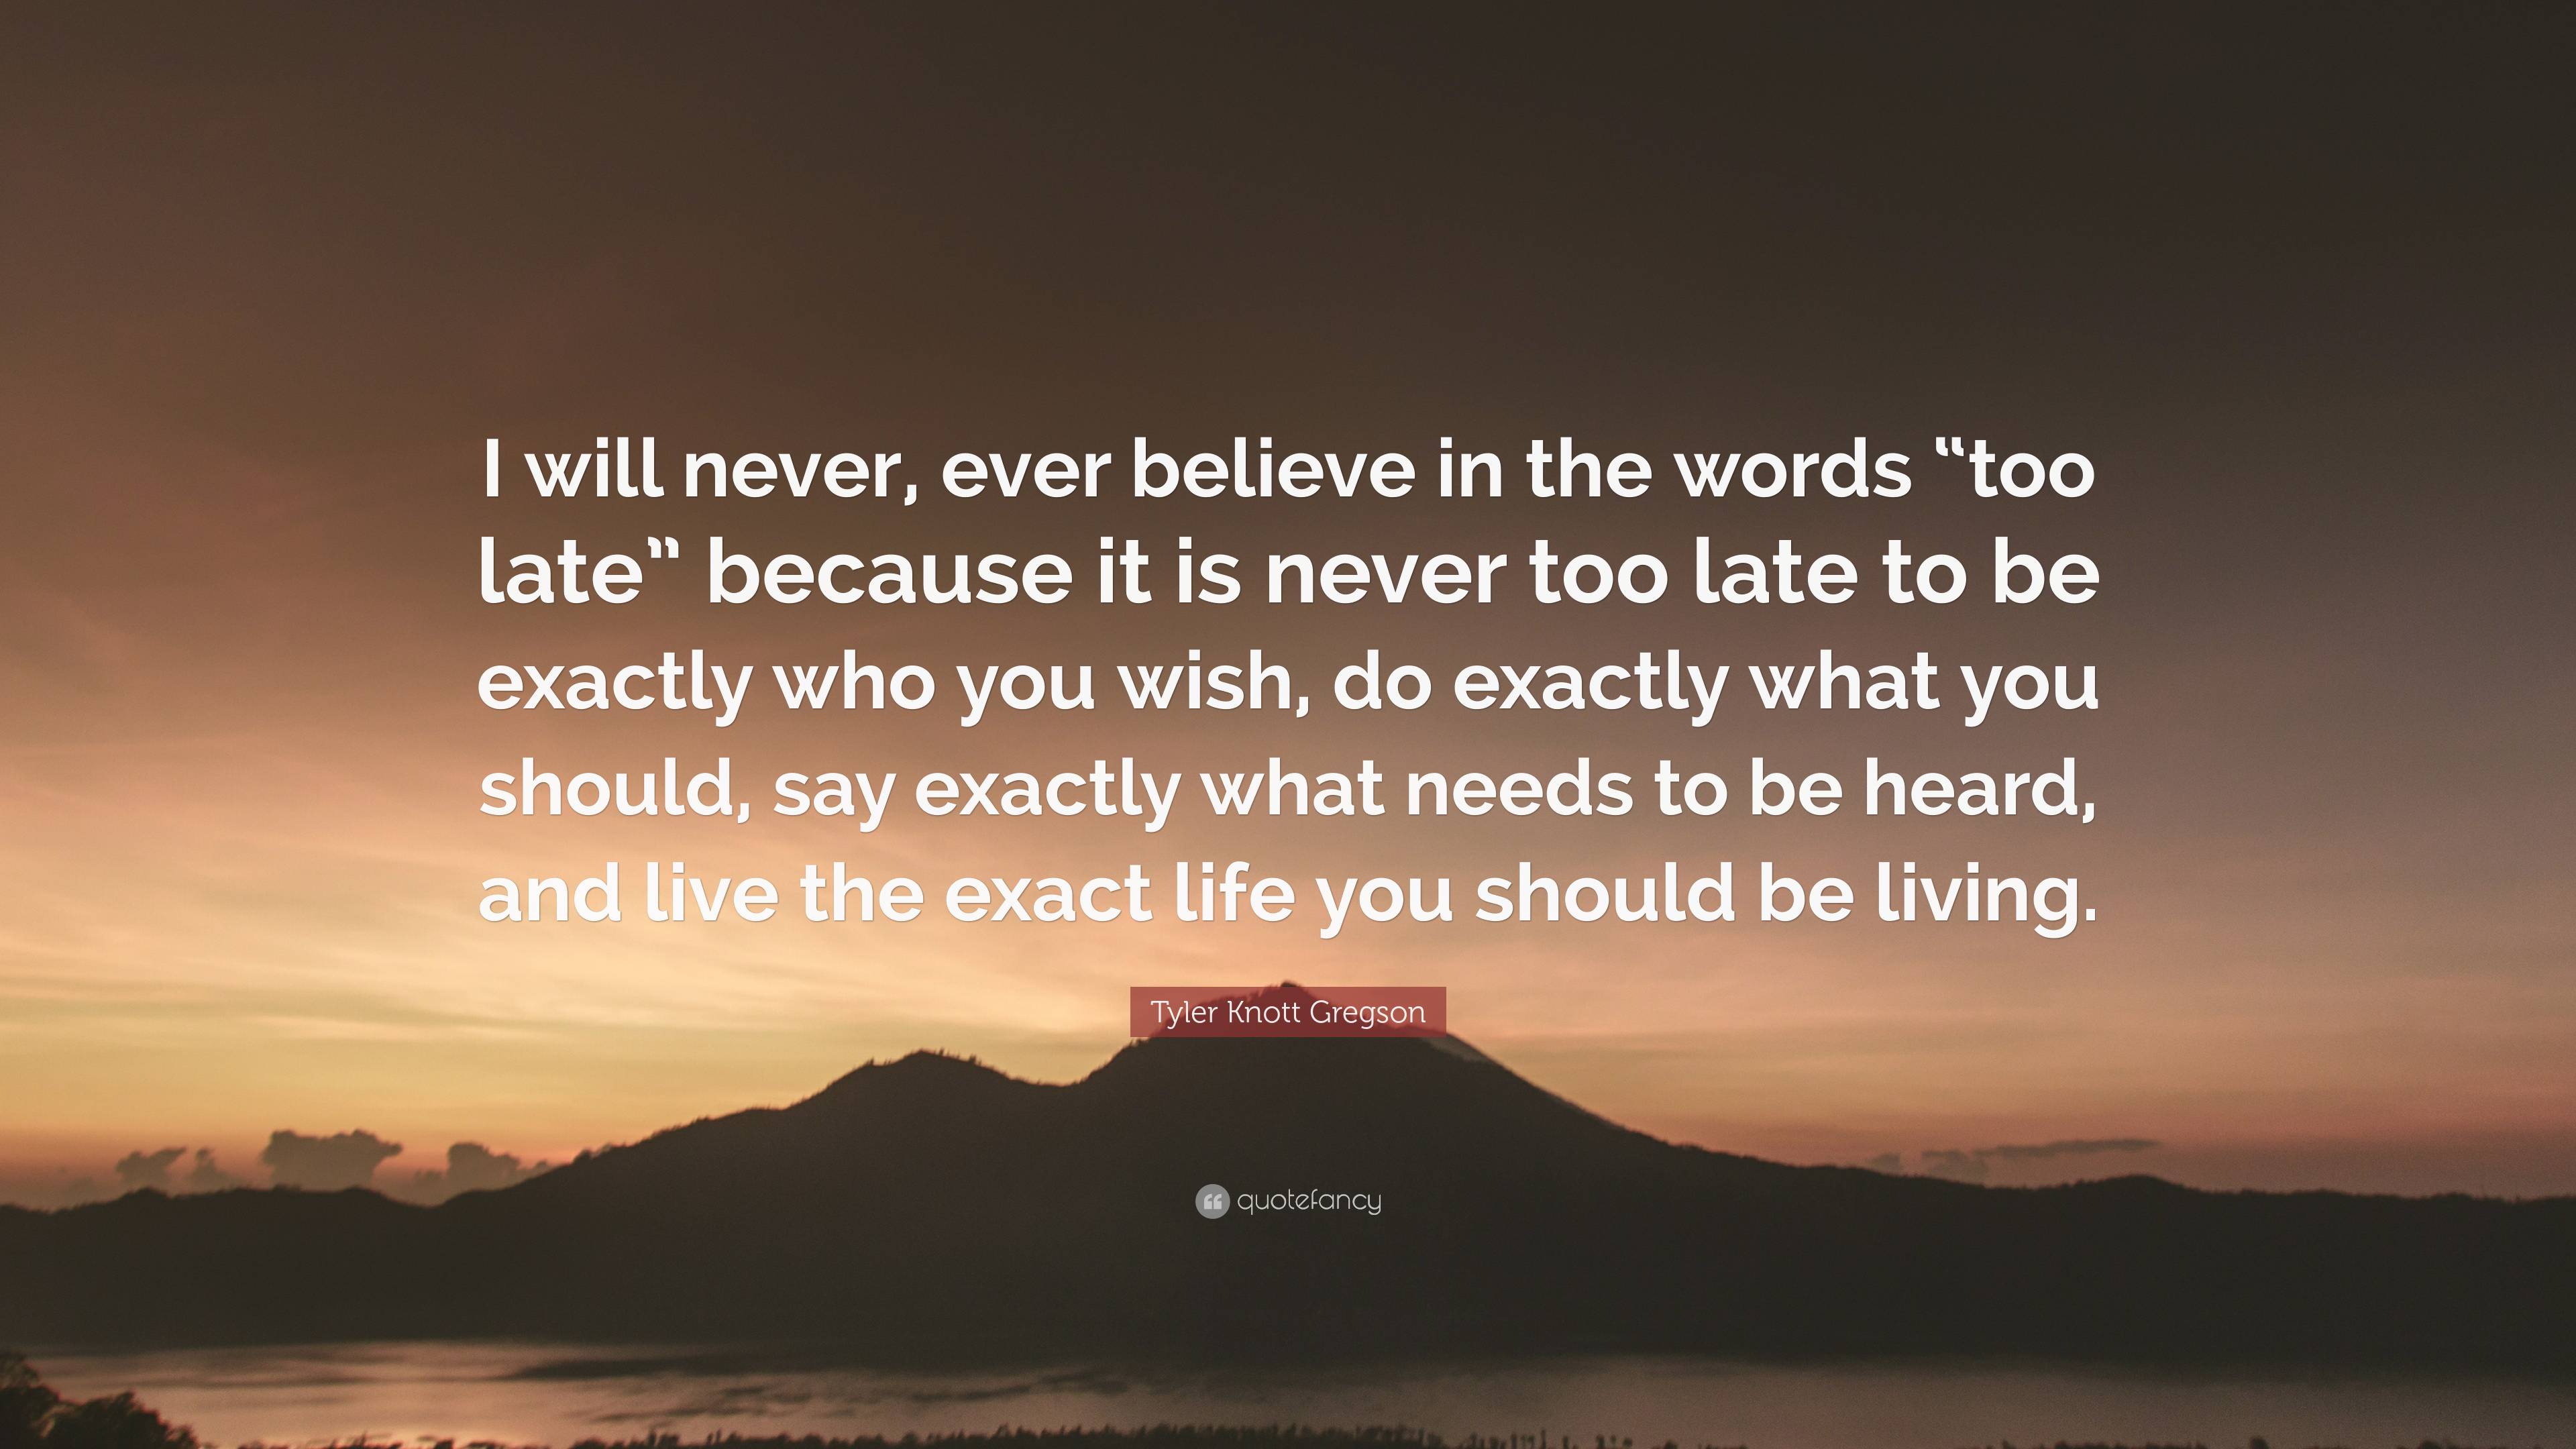 Tyler Knott Gregson Quote: “I will never, ever believe in the words ...